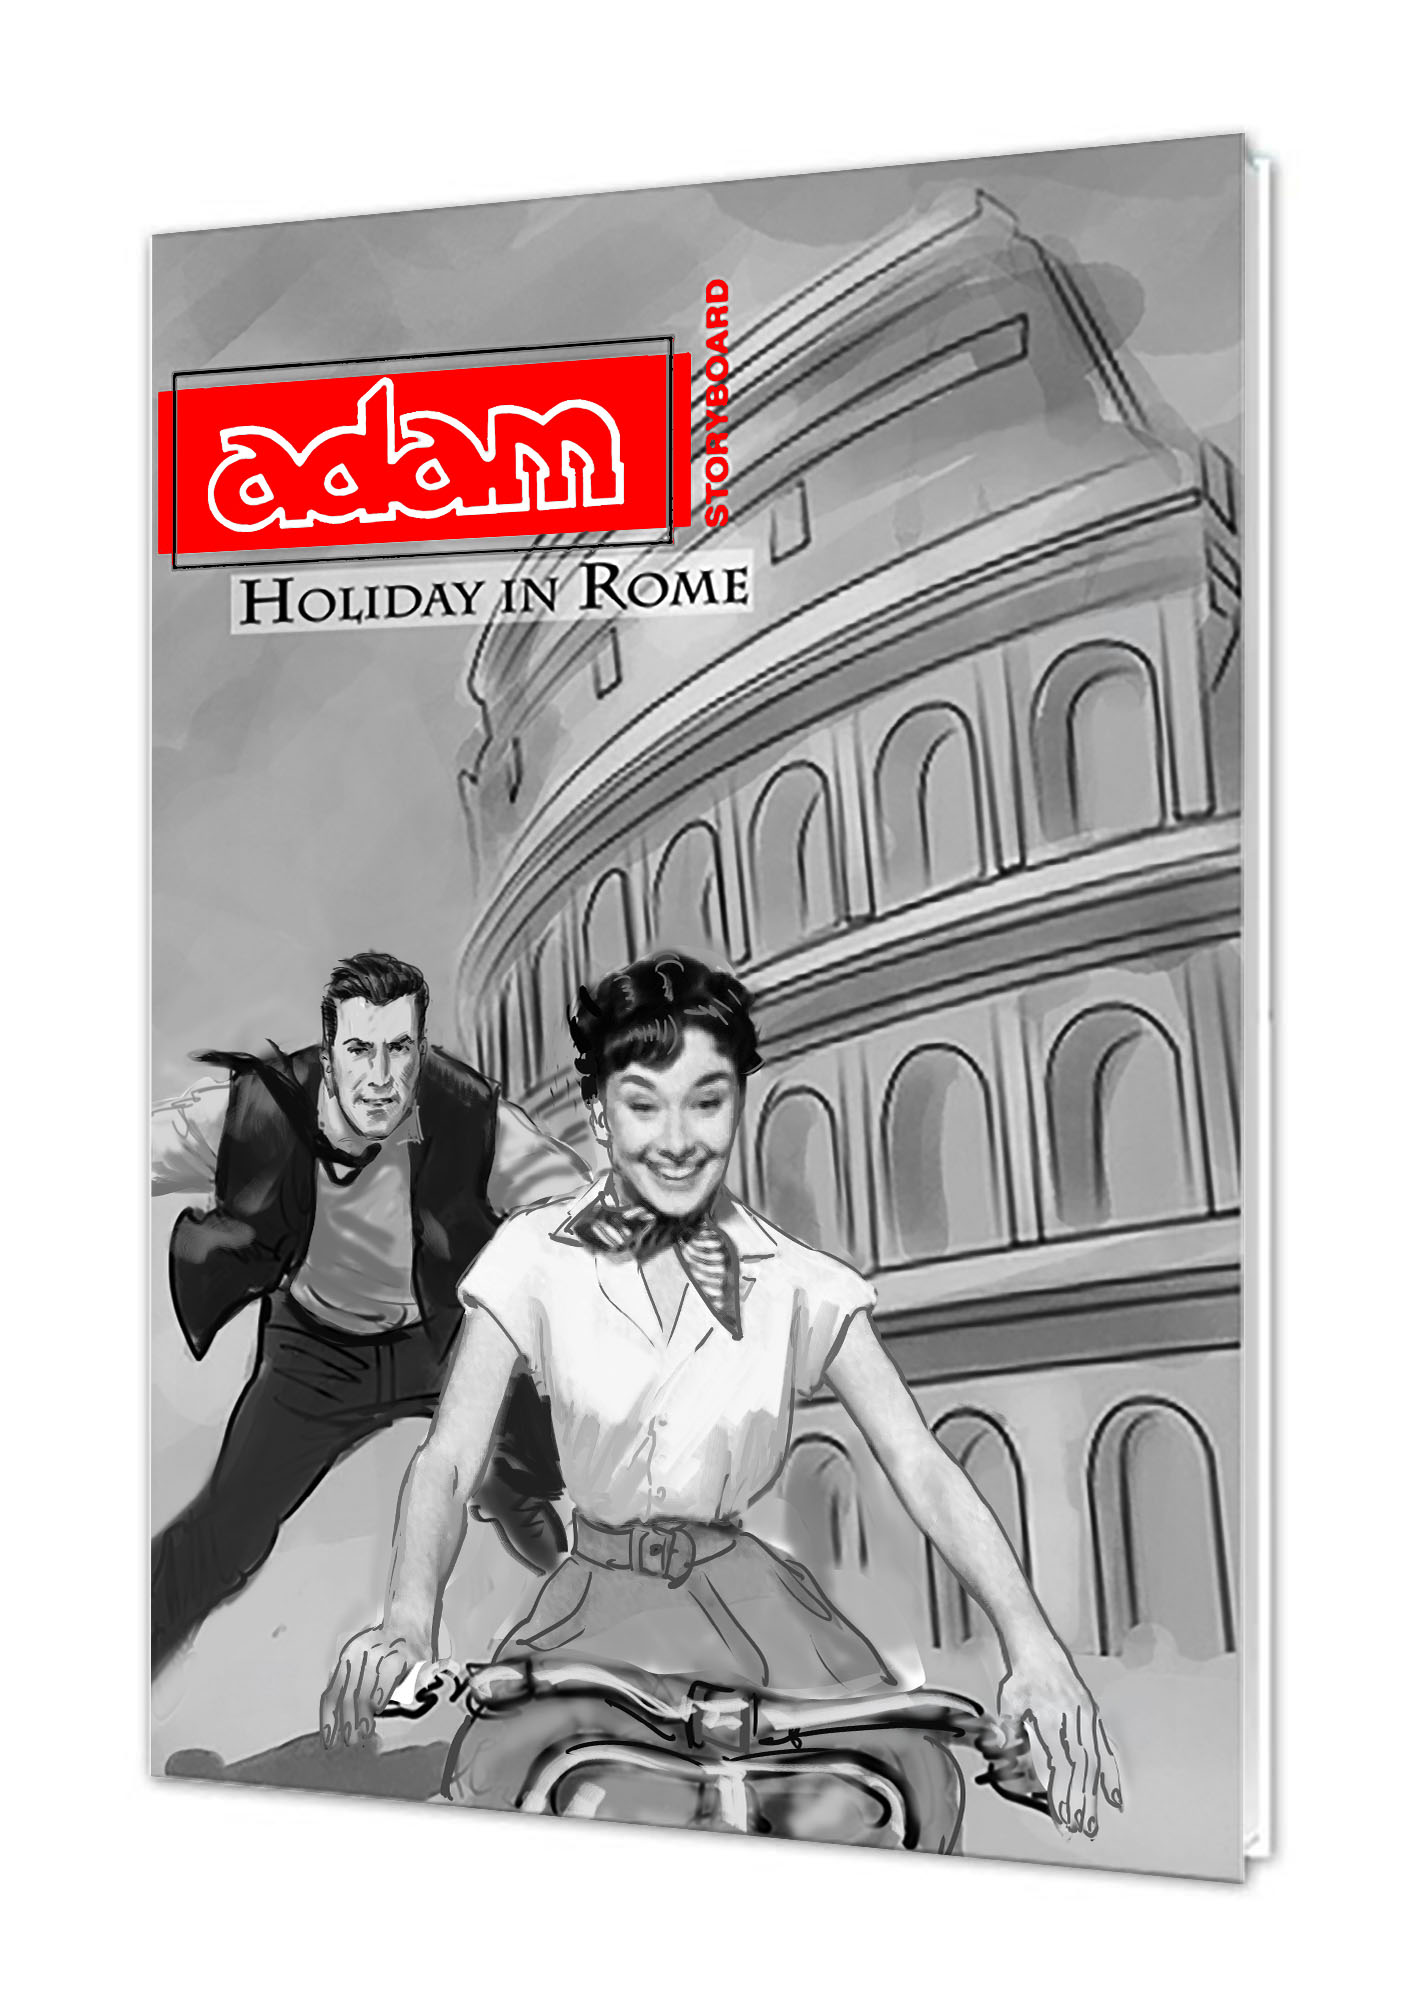 Adam Holiday in Rome, new cover